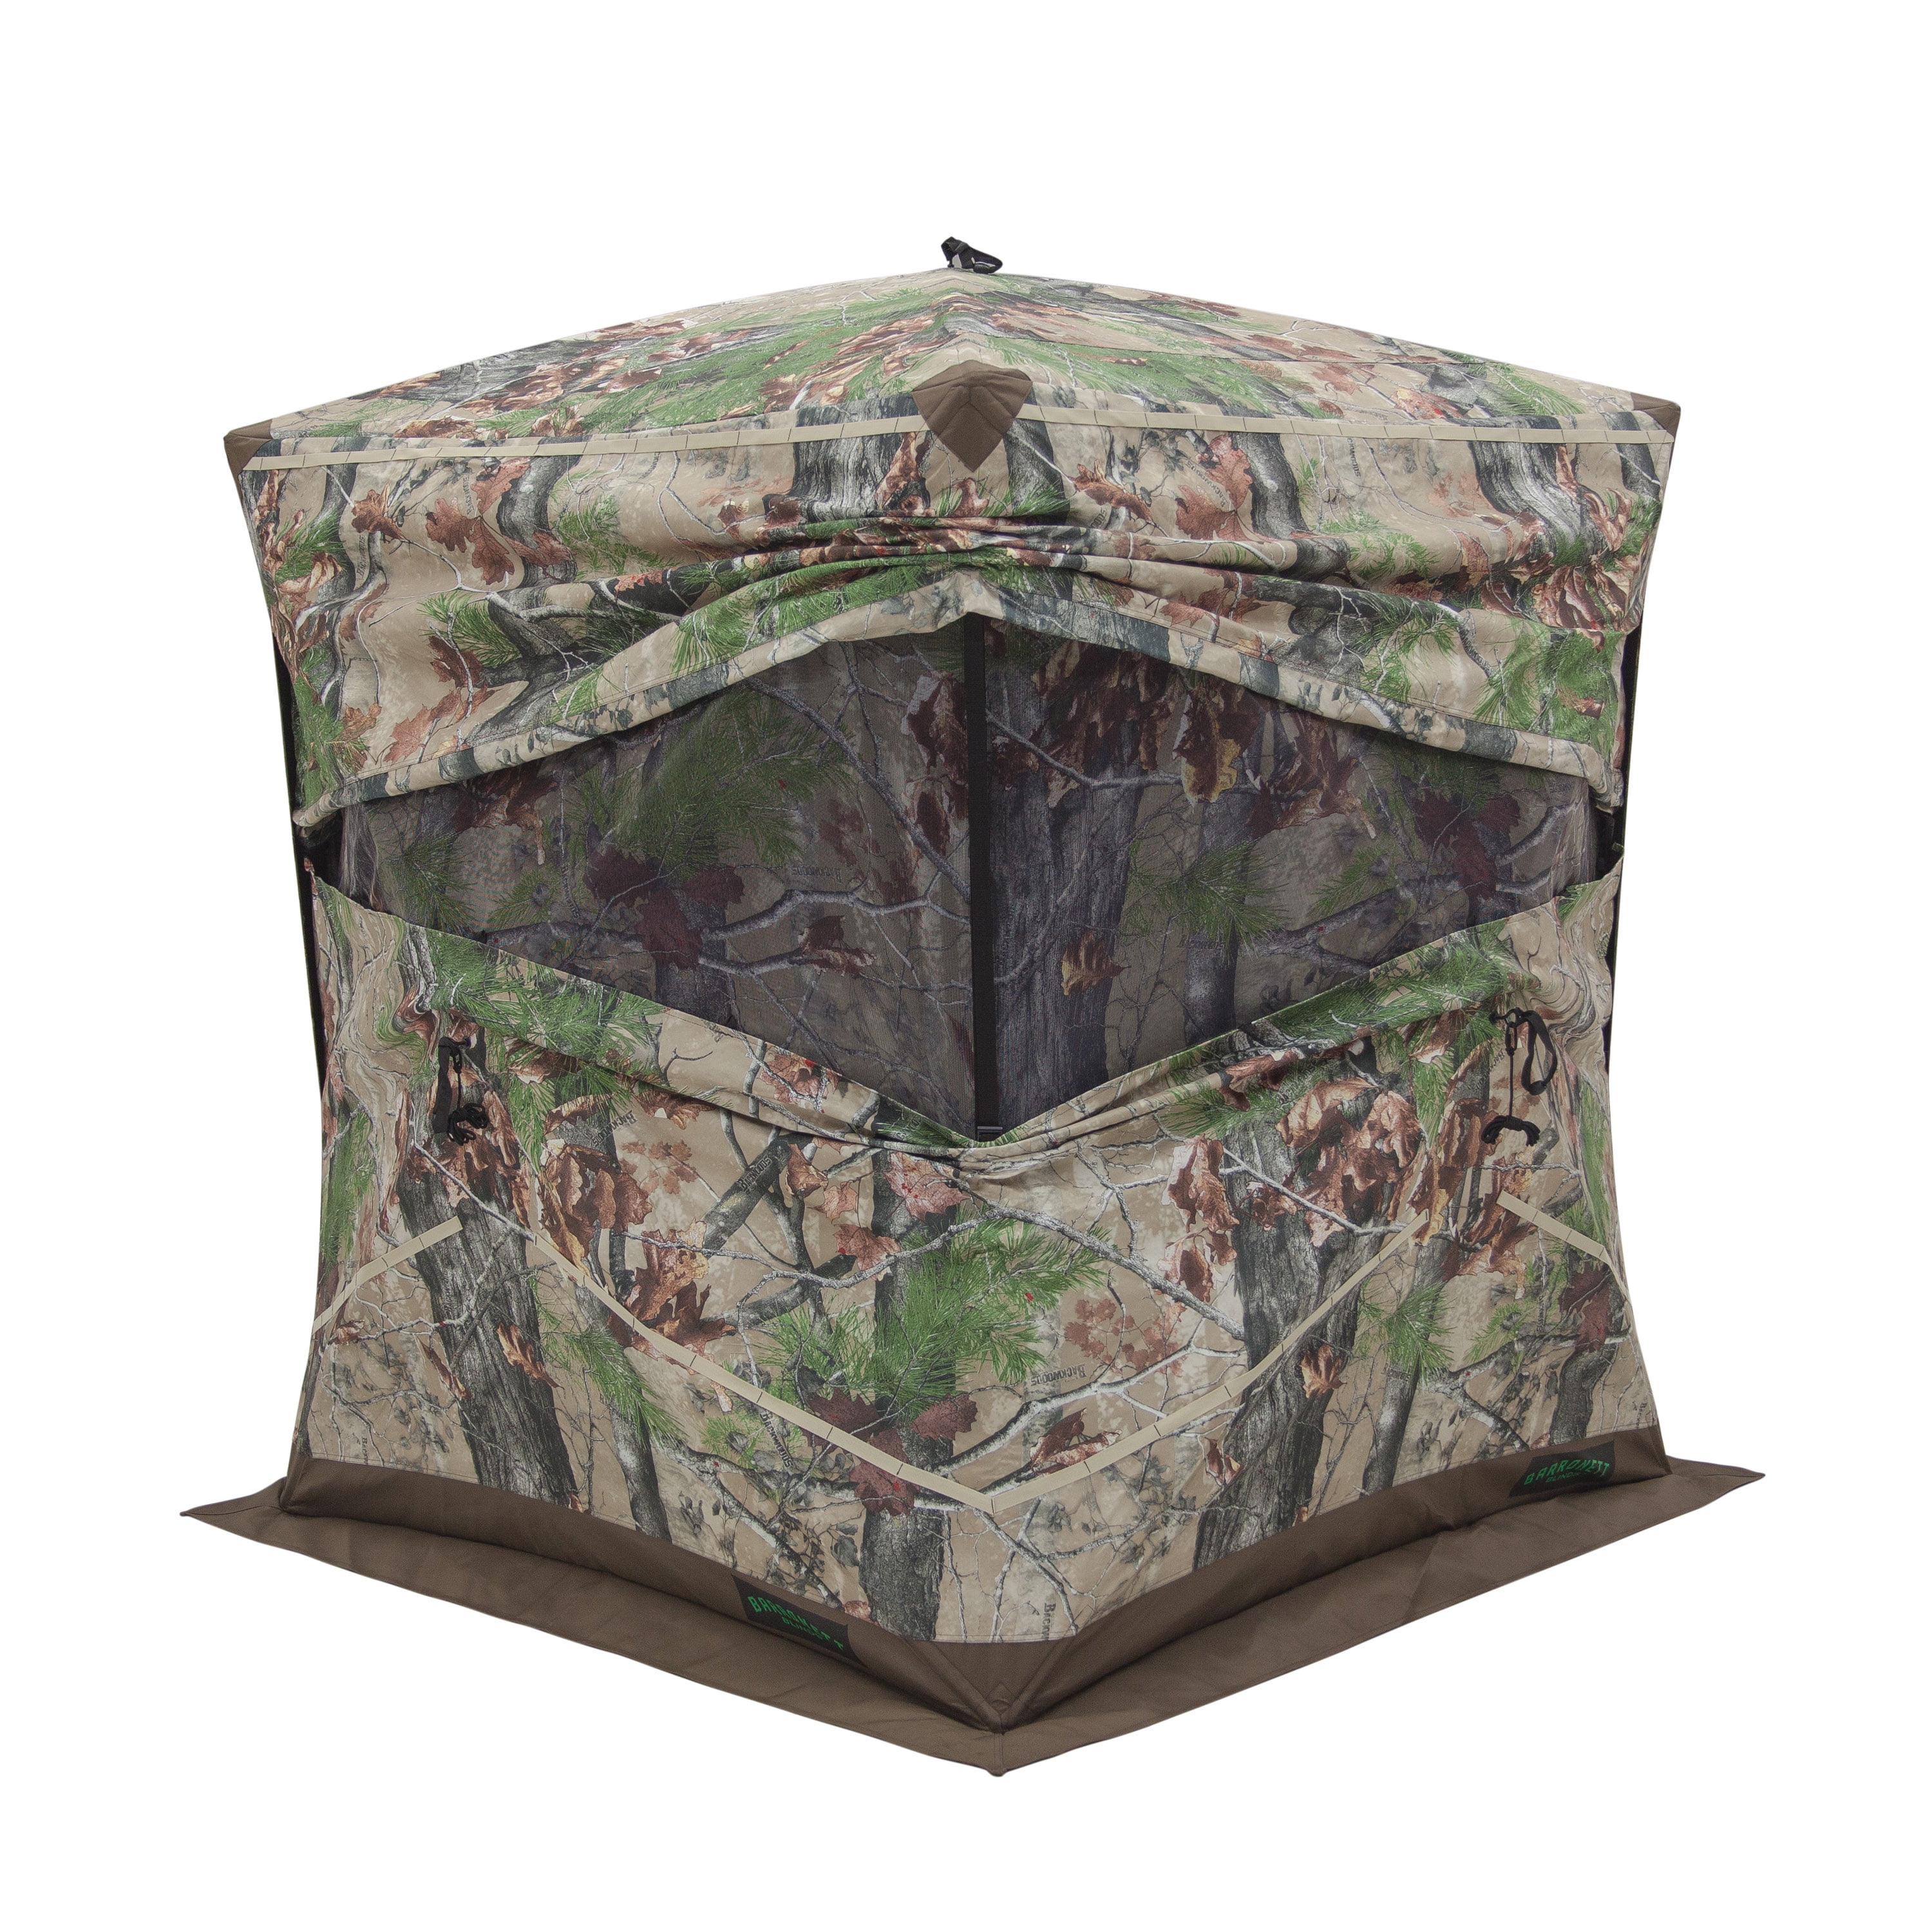 2 Pack Ameristep Care Taker 66 x 55 x 55 Polyester Realtree Camo Ground Blind 